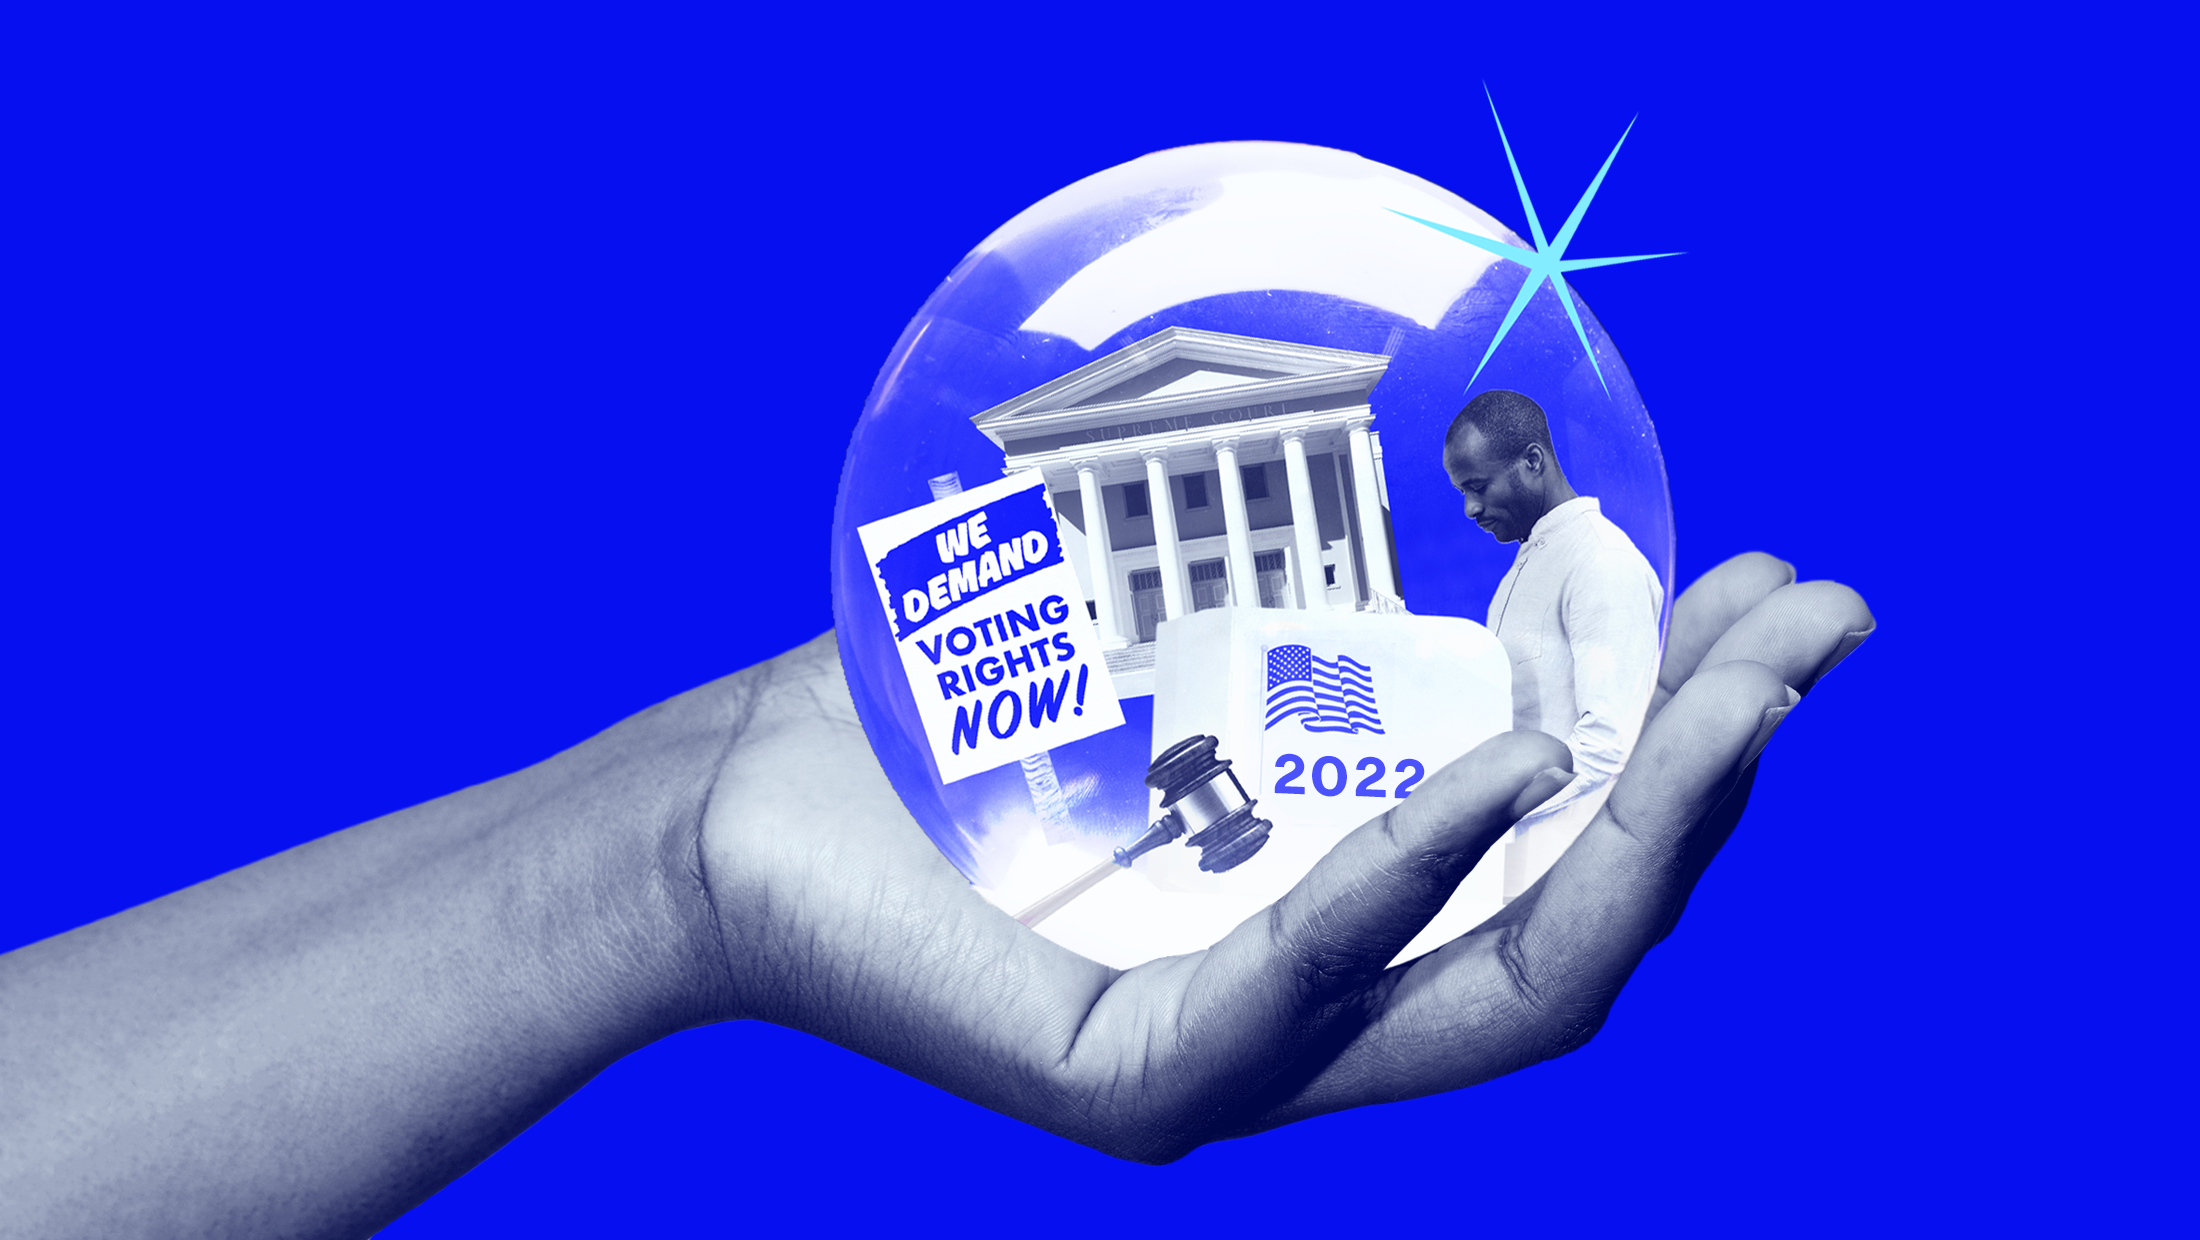 A hand holding a crystal ball revealing a courthouse, gavel, protest sign that reads "WE DEMAND VOTING RIGHTS NOW!", and person voting inside a voting booth that reads "2022" on the outside of it